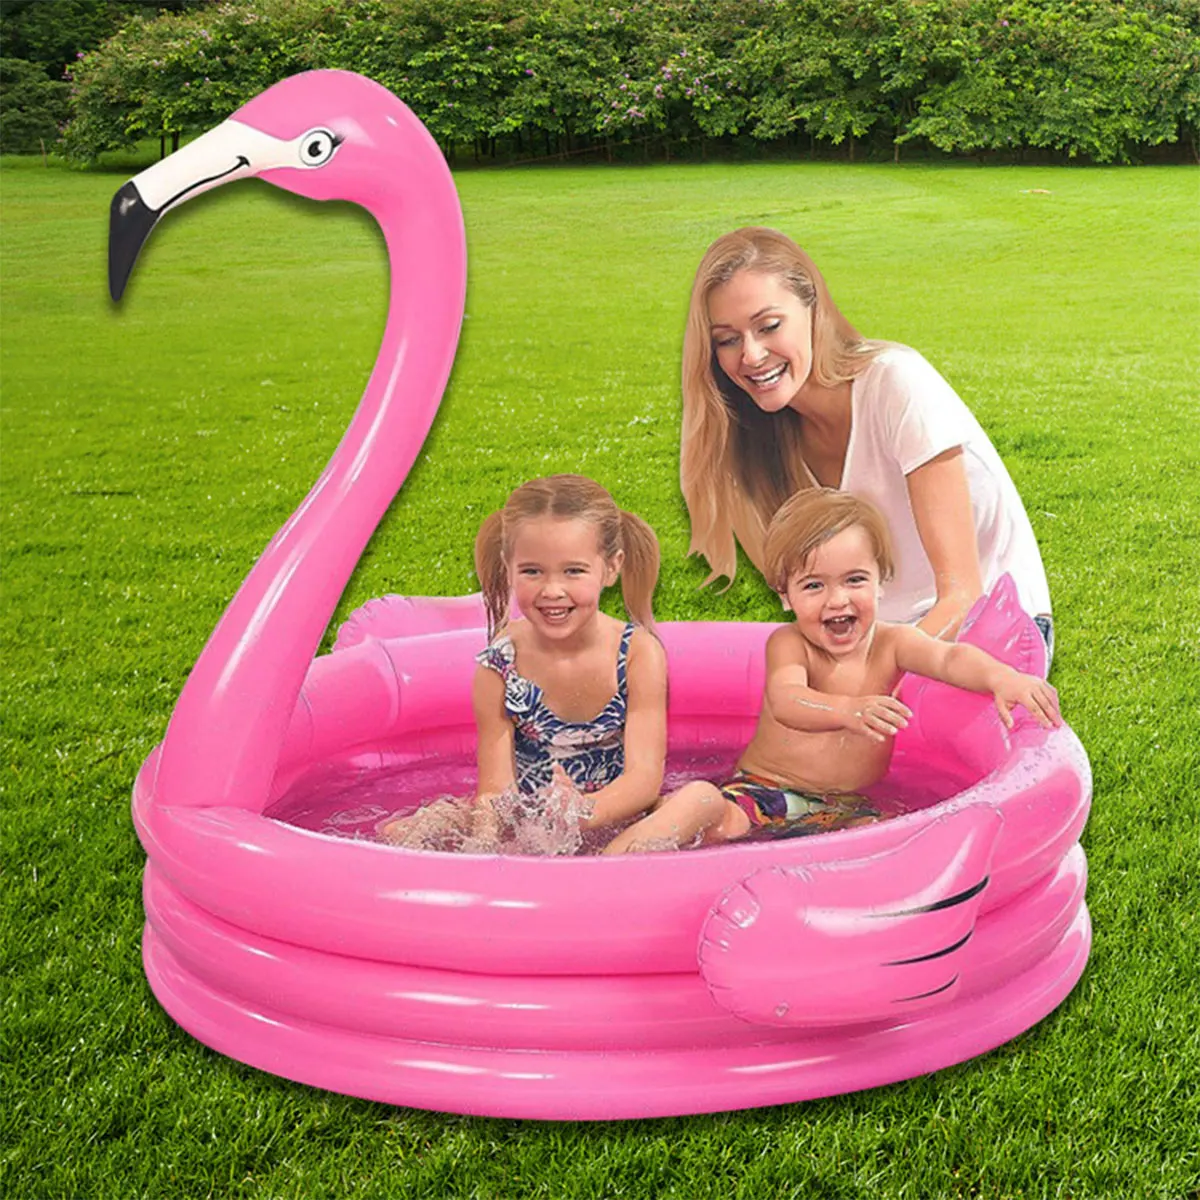 Children Inflatable Round Three-Ring Flamingo Pool Foldable Portable Outdoor Paddling Pool Ocean Ball Fence Playroom Decoration portable jewelry storage case foldable soft accessory roll decoration